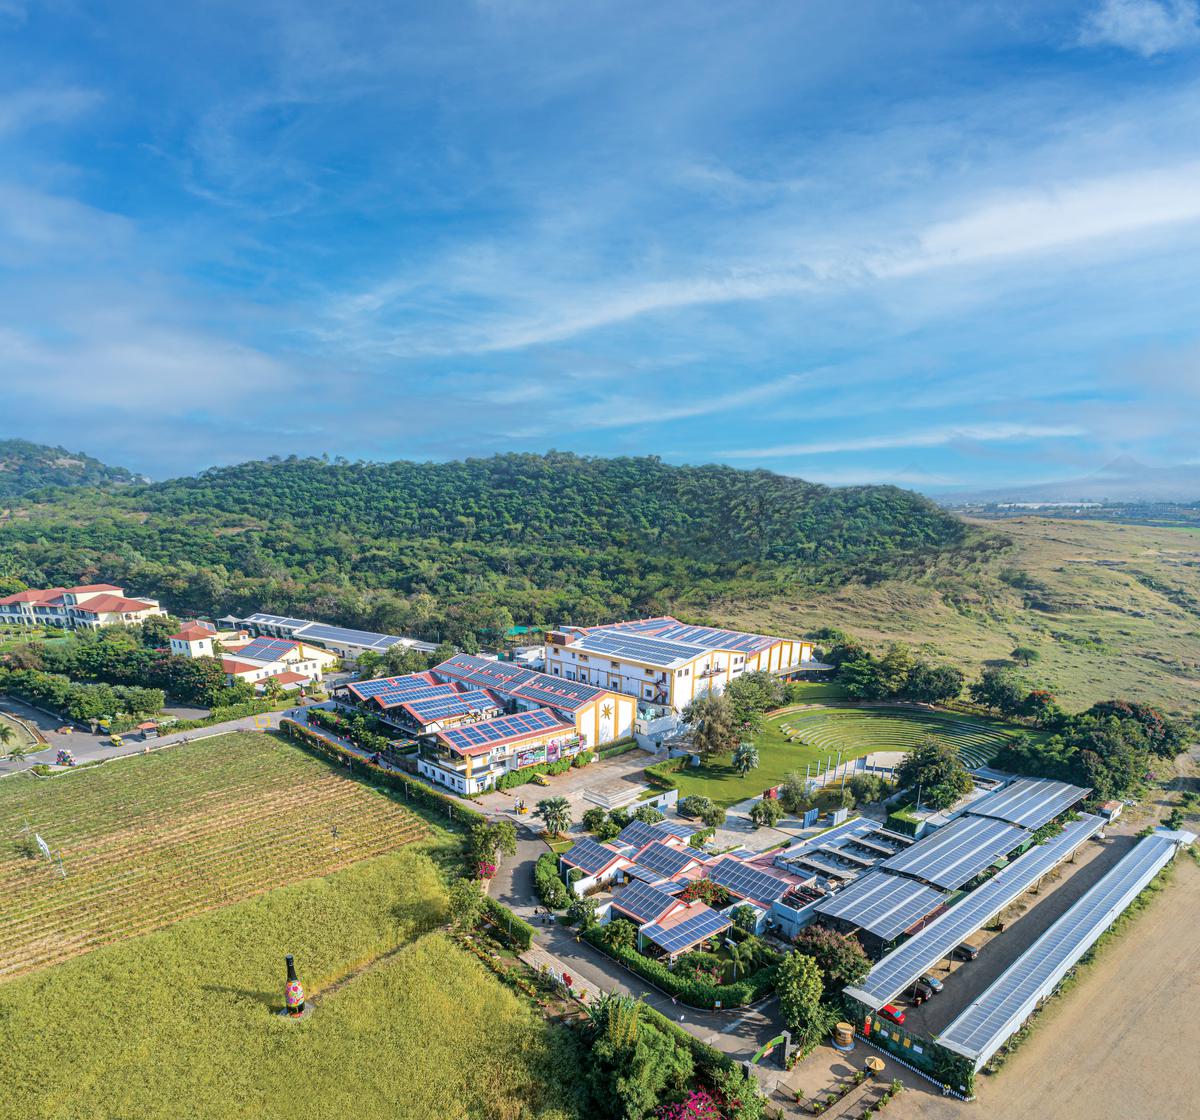 An aerial view of the solar panels at Sula Vineyards in Nashik